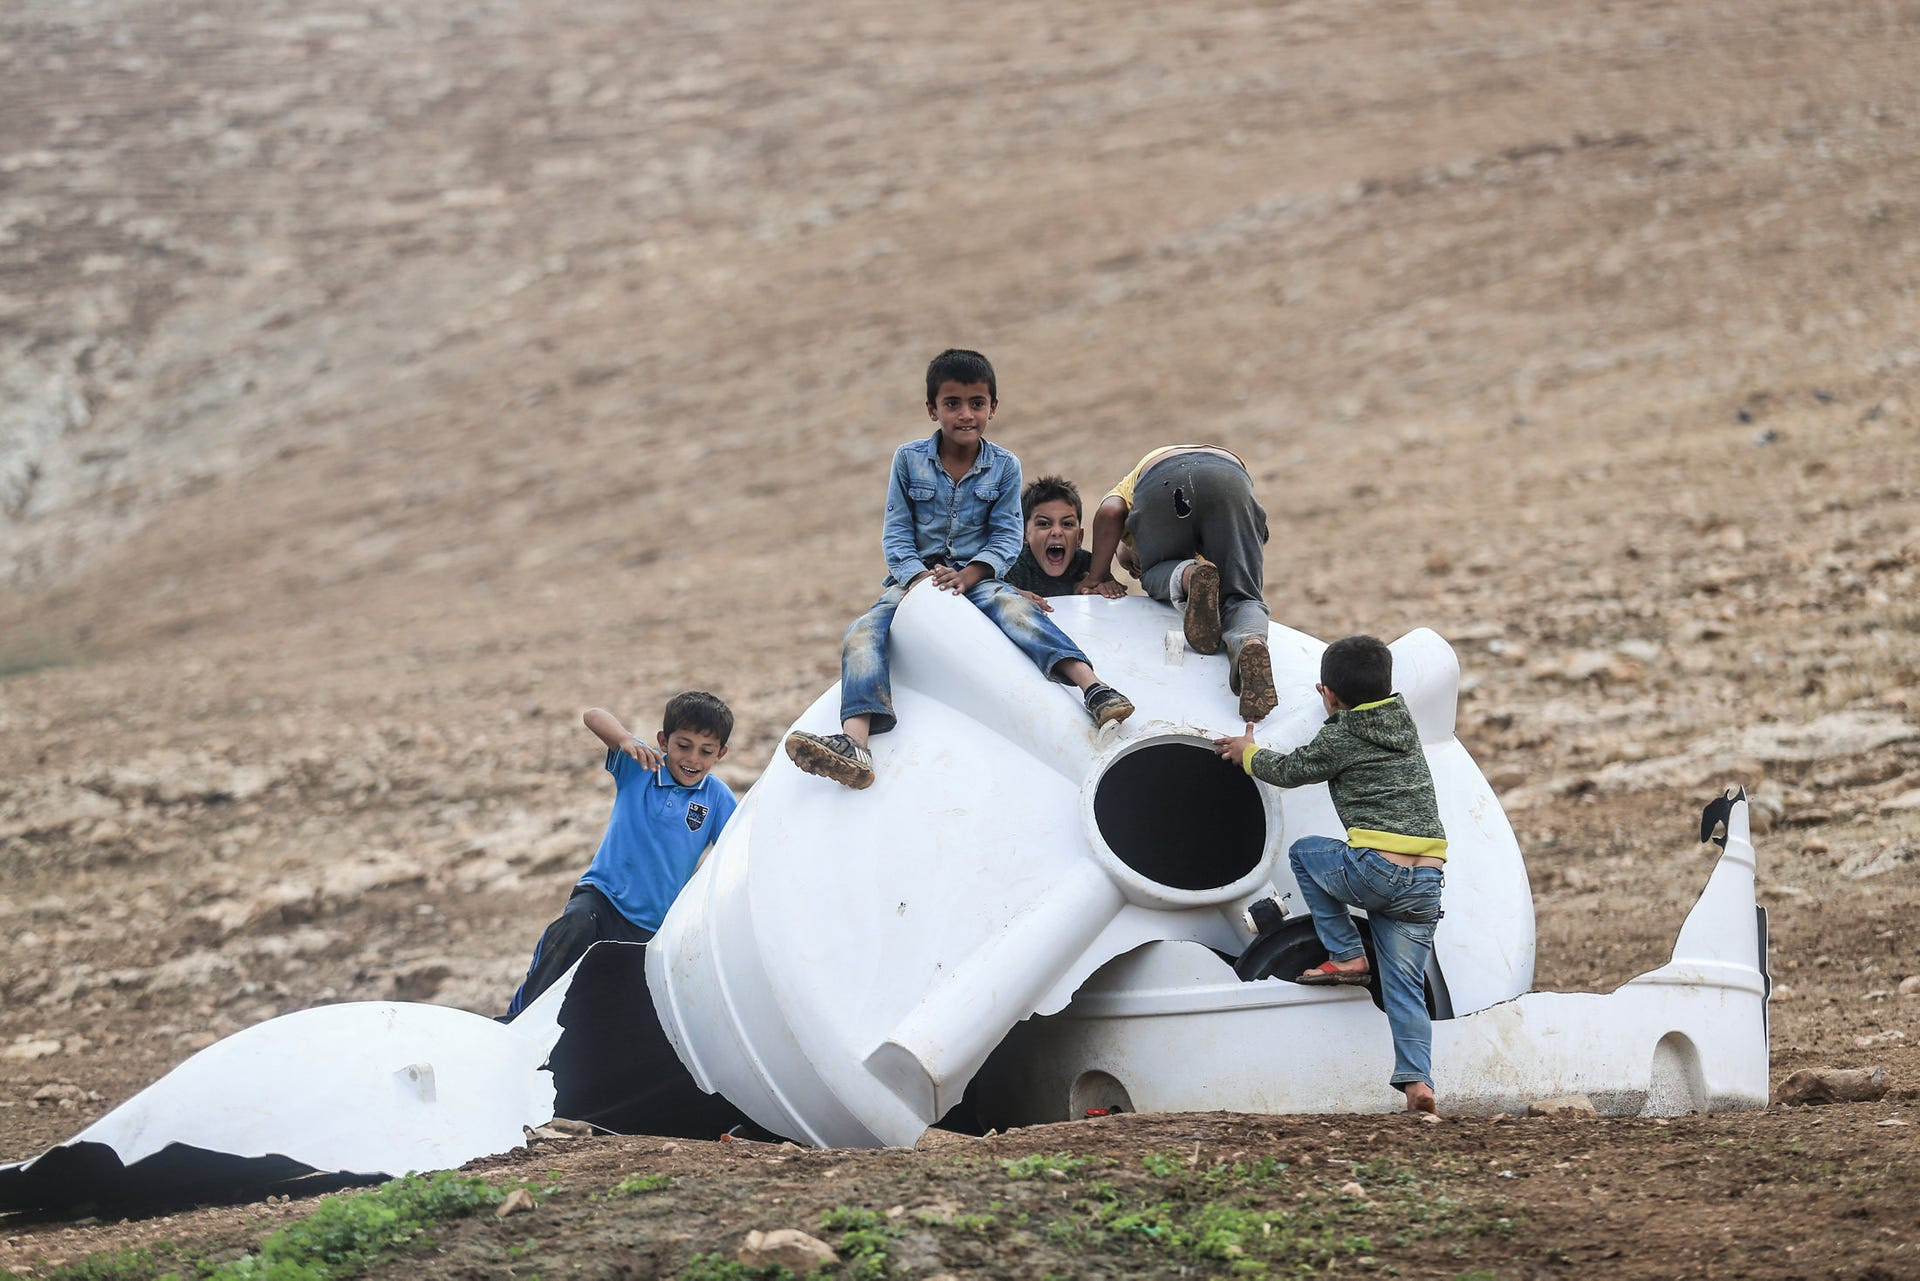 Children play in the ruins of Khirbet Humsa after its demolition, November 2020.